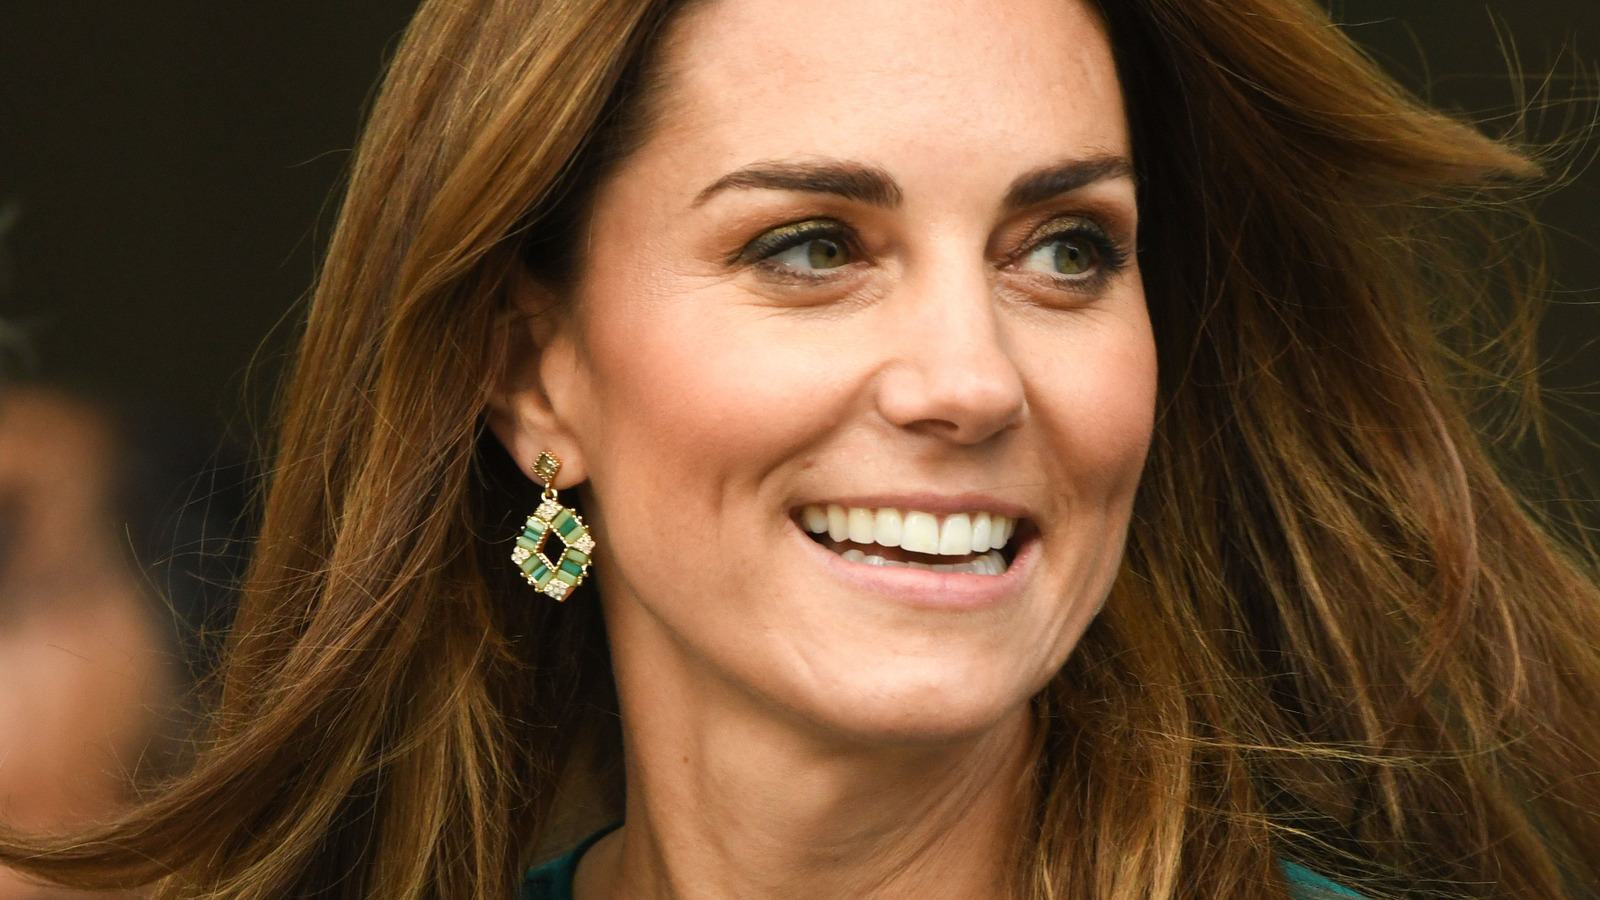 Are Kate Middleton And Prince William Ready To Move Out Of London?